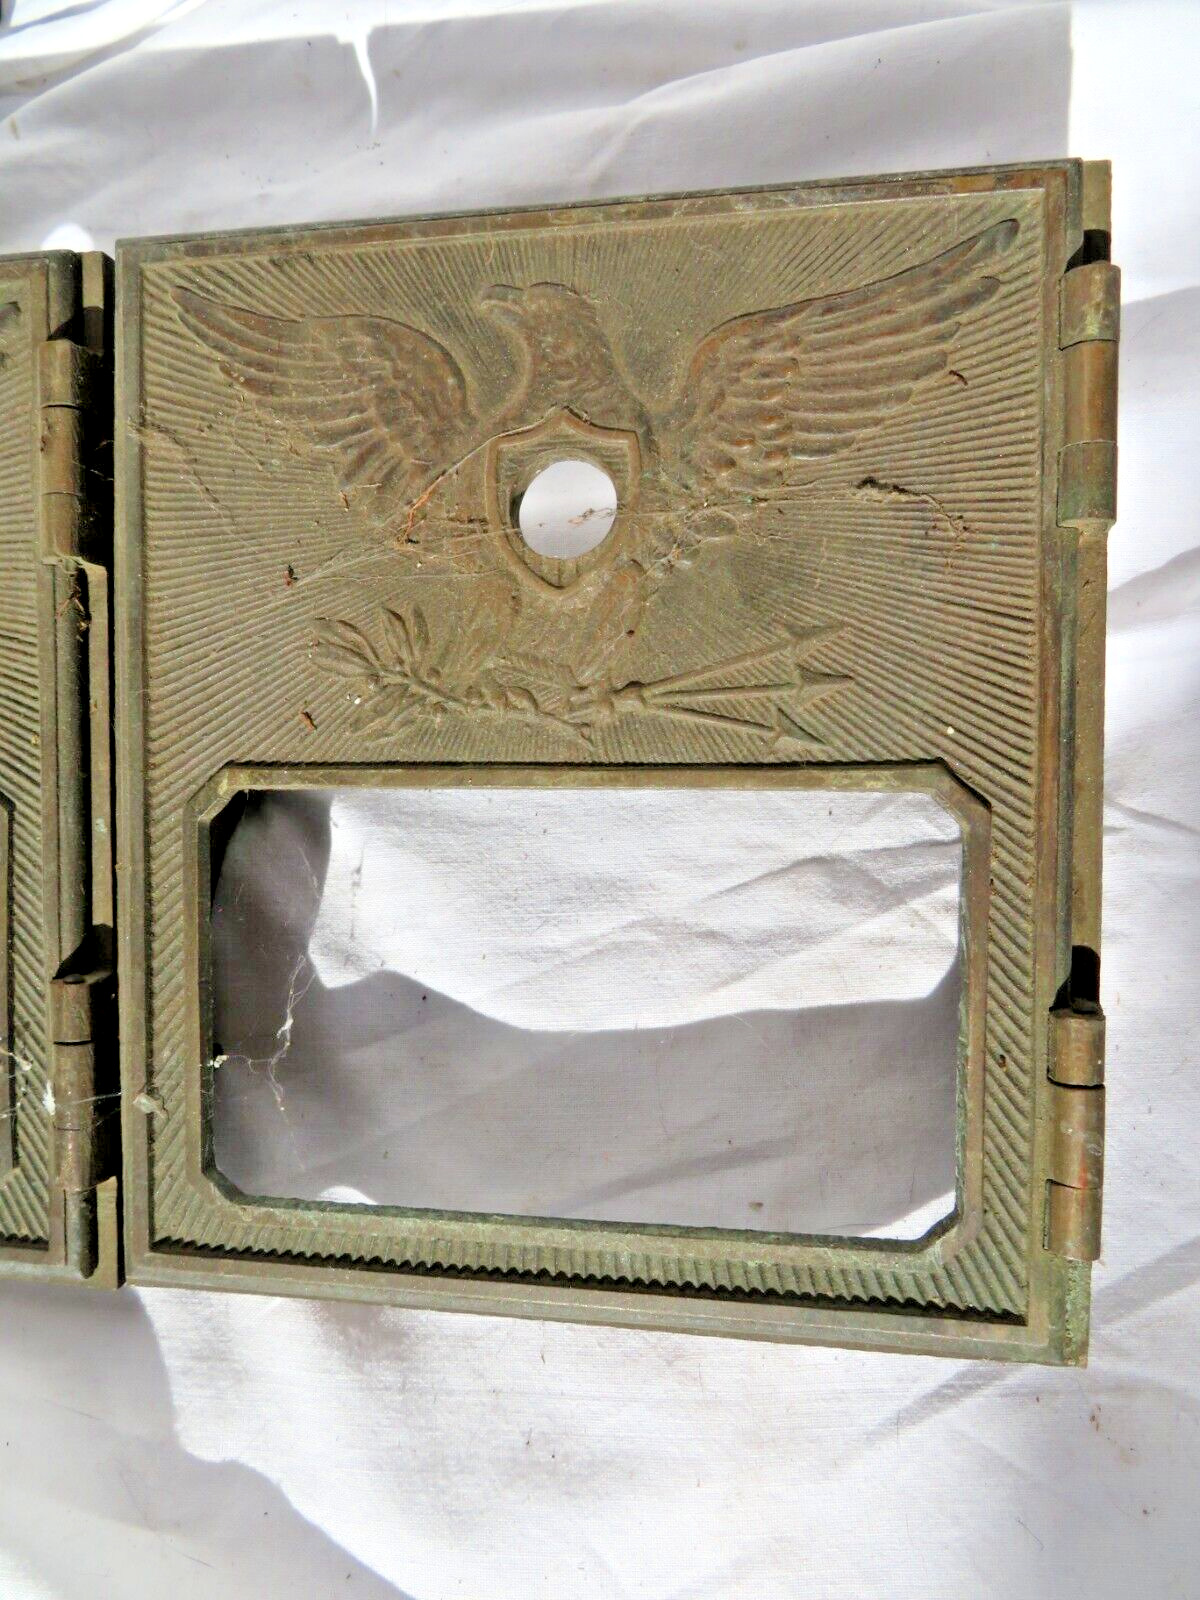 9 ANTIQUE BRASS EAGLE ~  MAIL POST OFFICE BOX ~ U.S. MAIL BOX ~YALE  TOWNE 1895